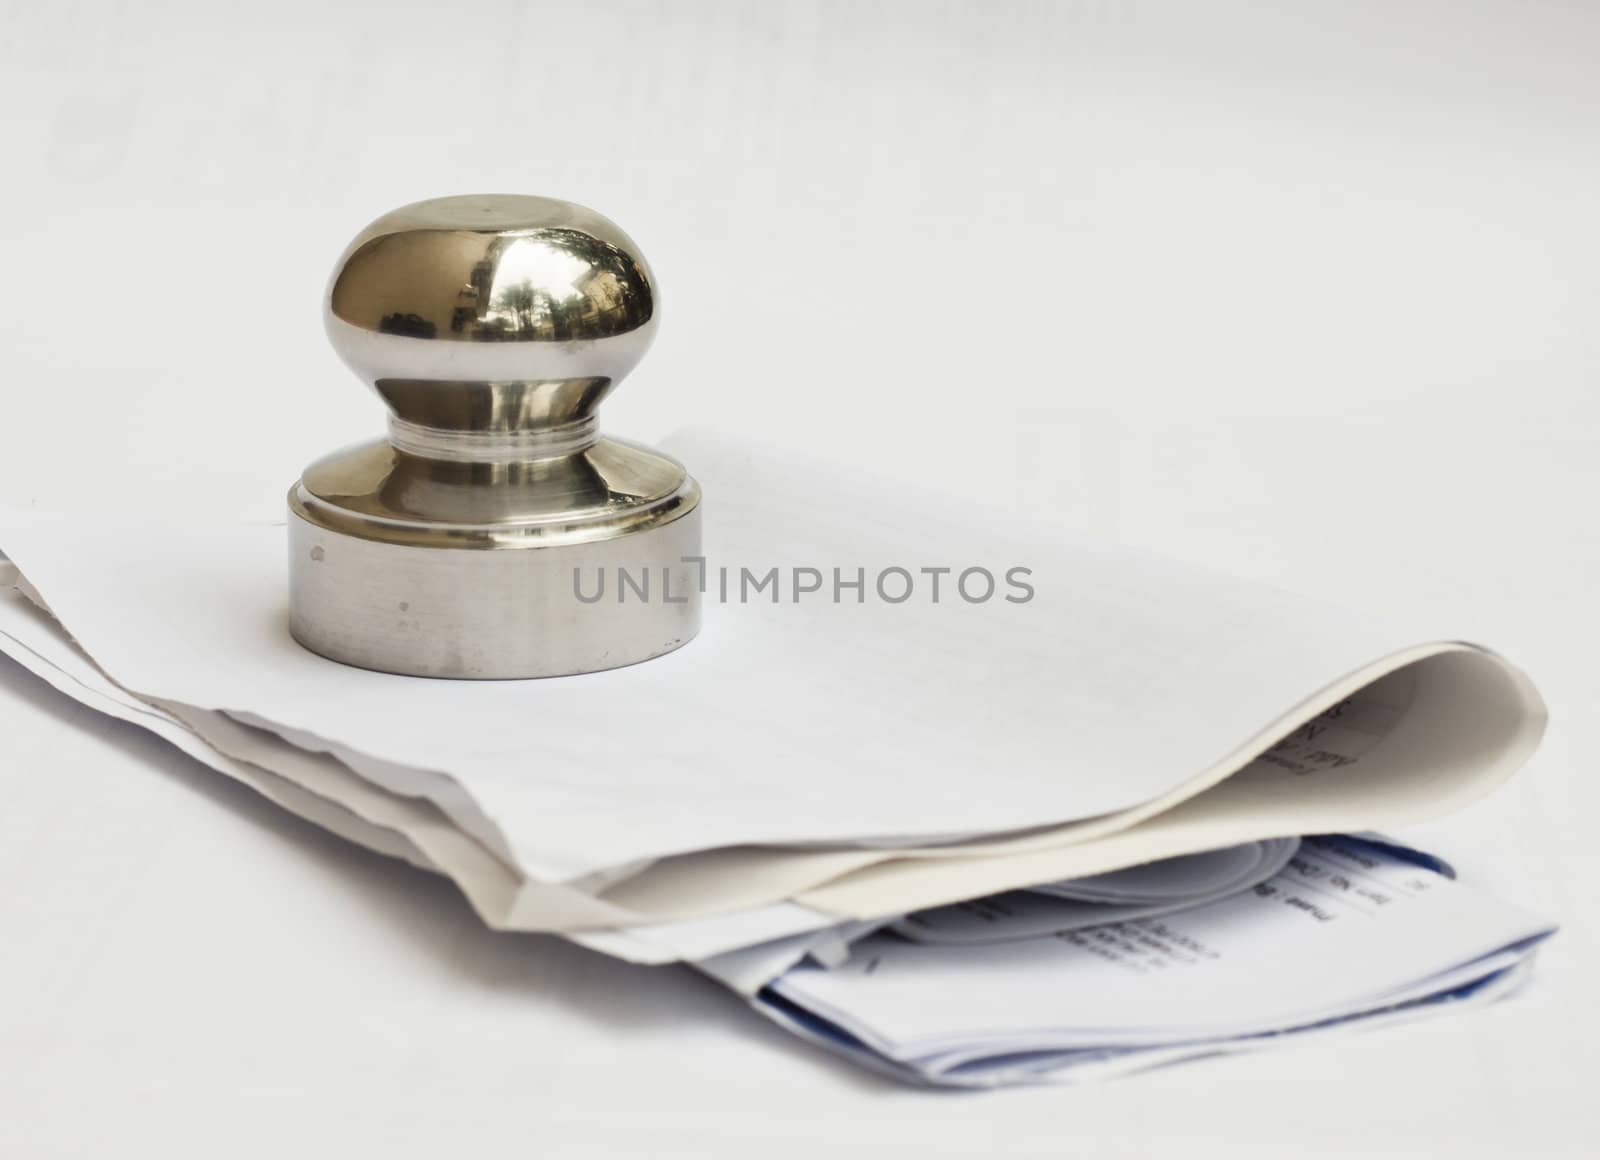 A stainless steel weight to prevent document from being blown off